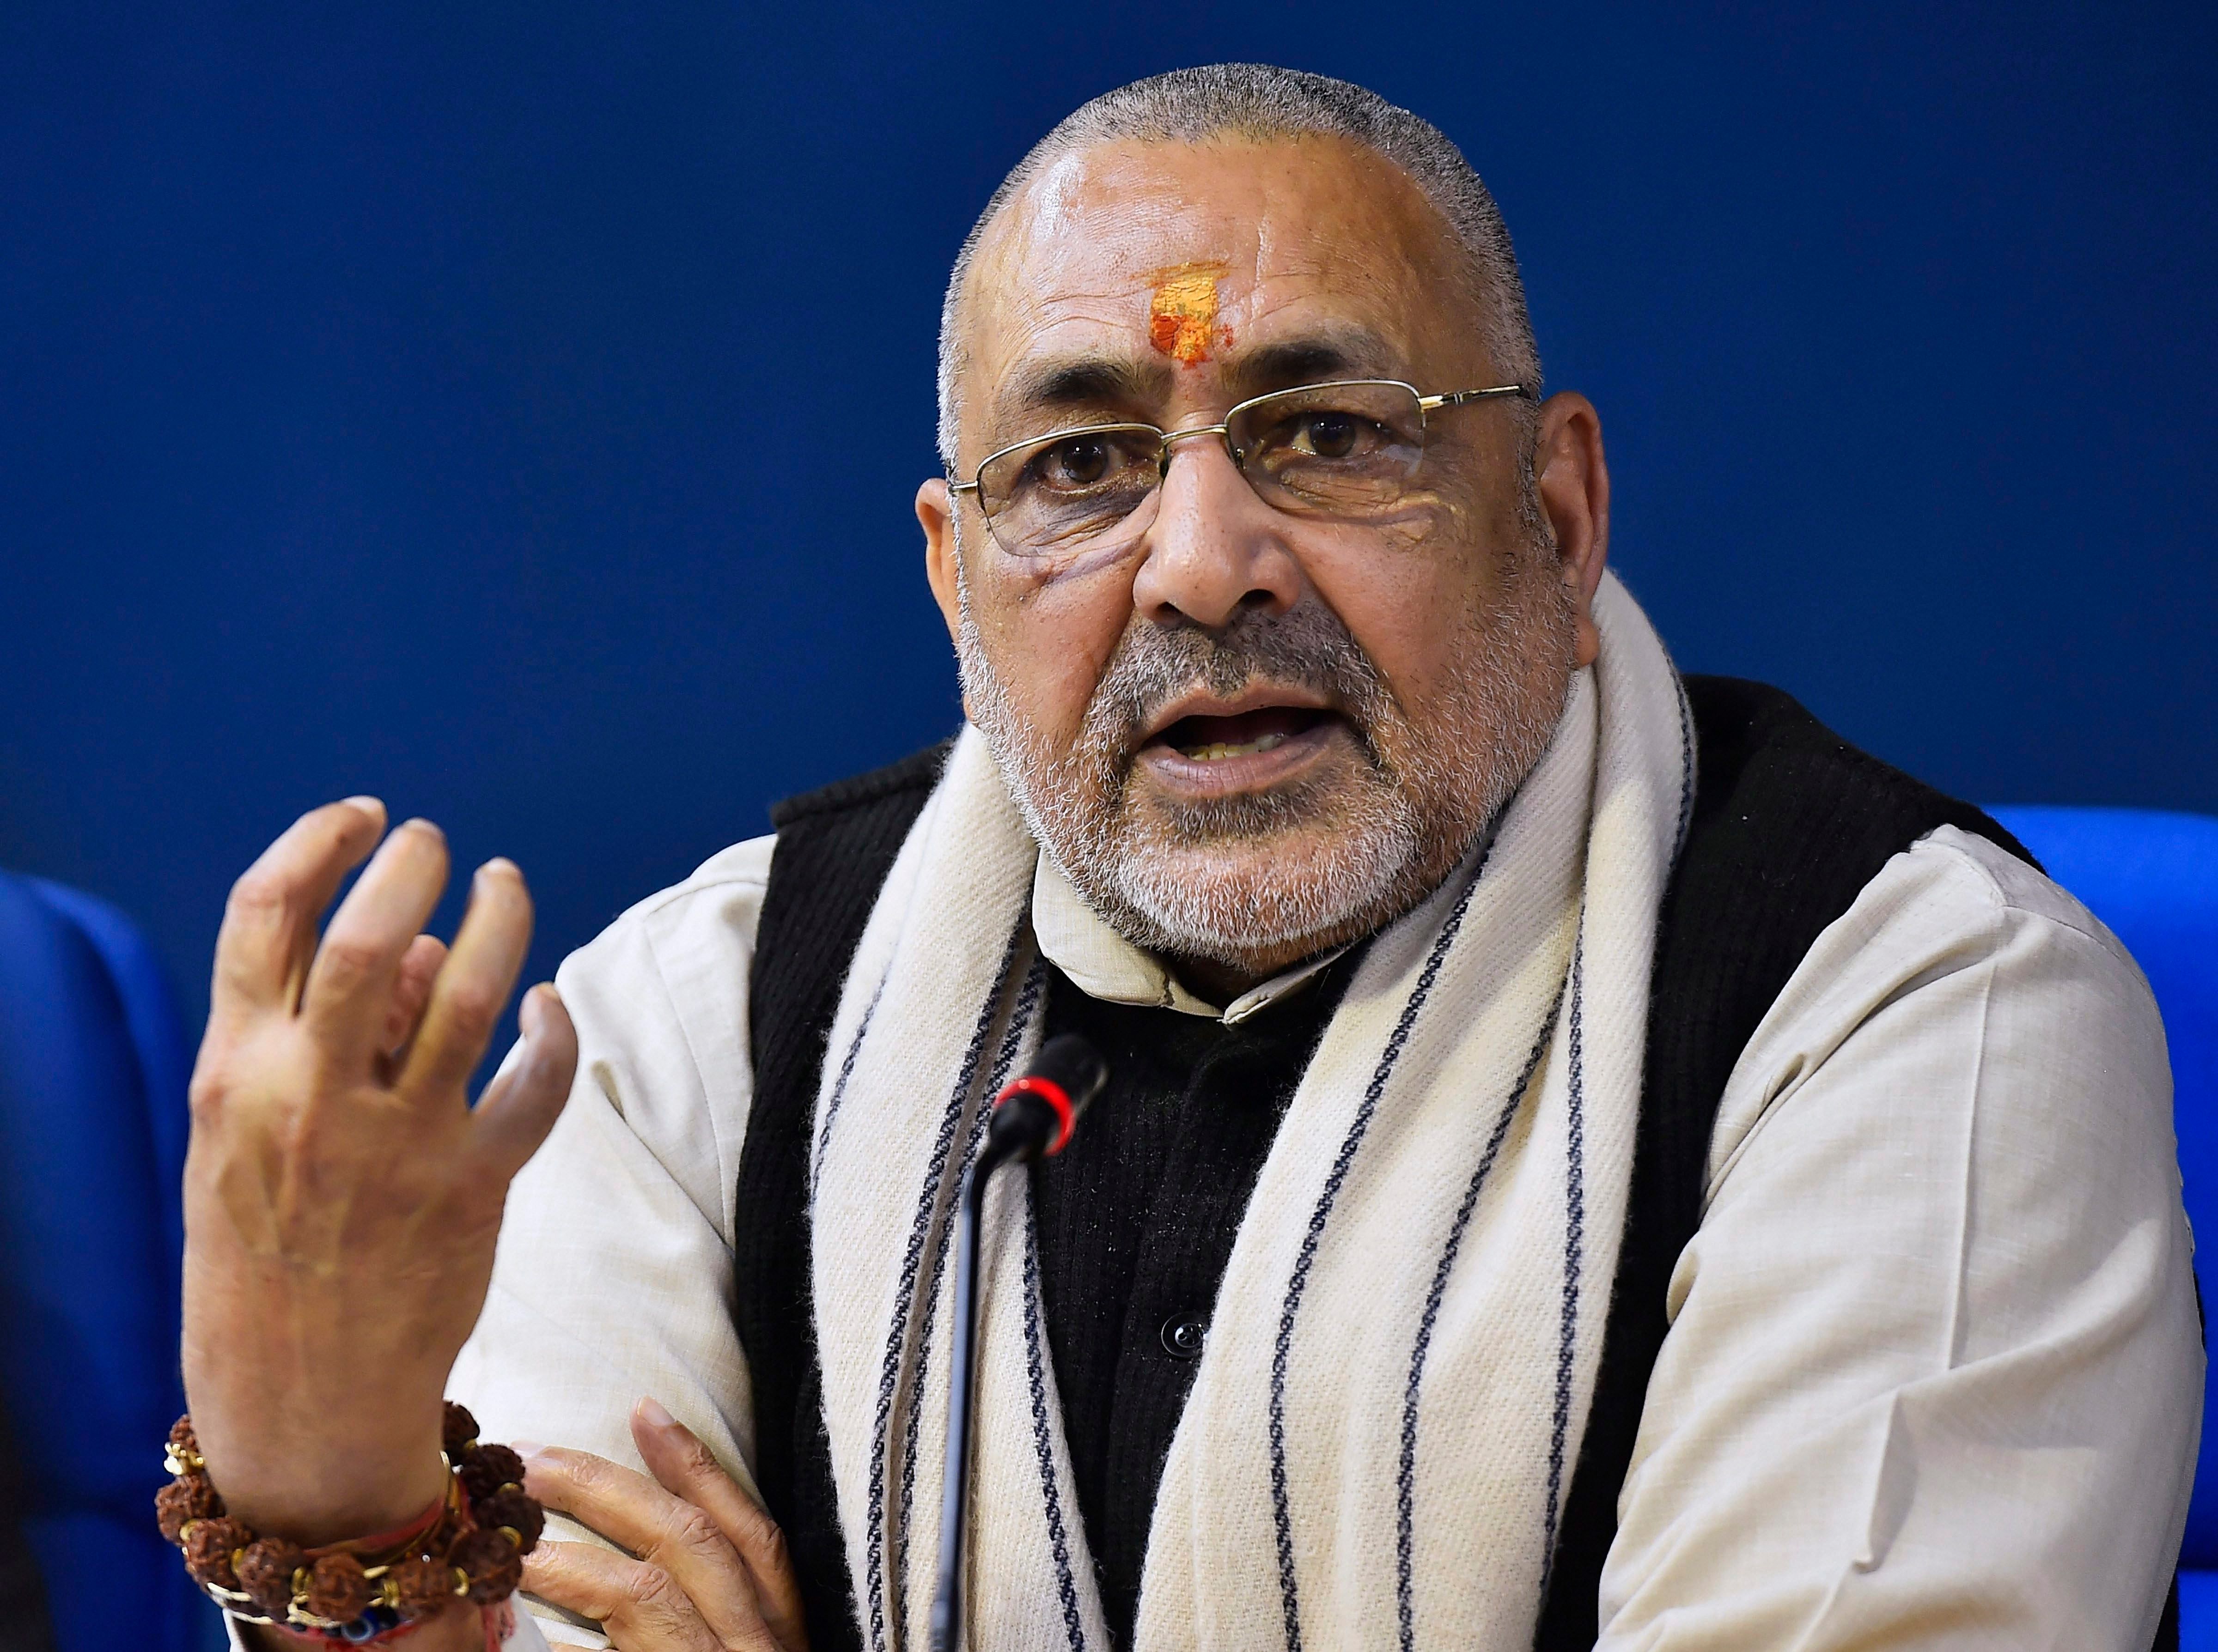 Union minister Giriraj Kishore targeted Opposition parties and said "Osama supporters" and Maoists are coming together to defeat the Modi government. PTI file photo